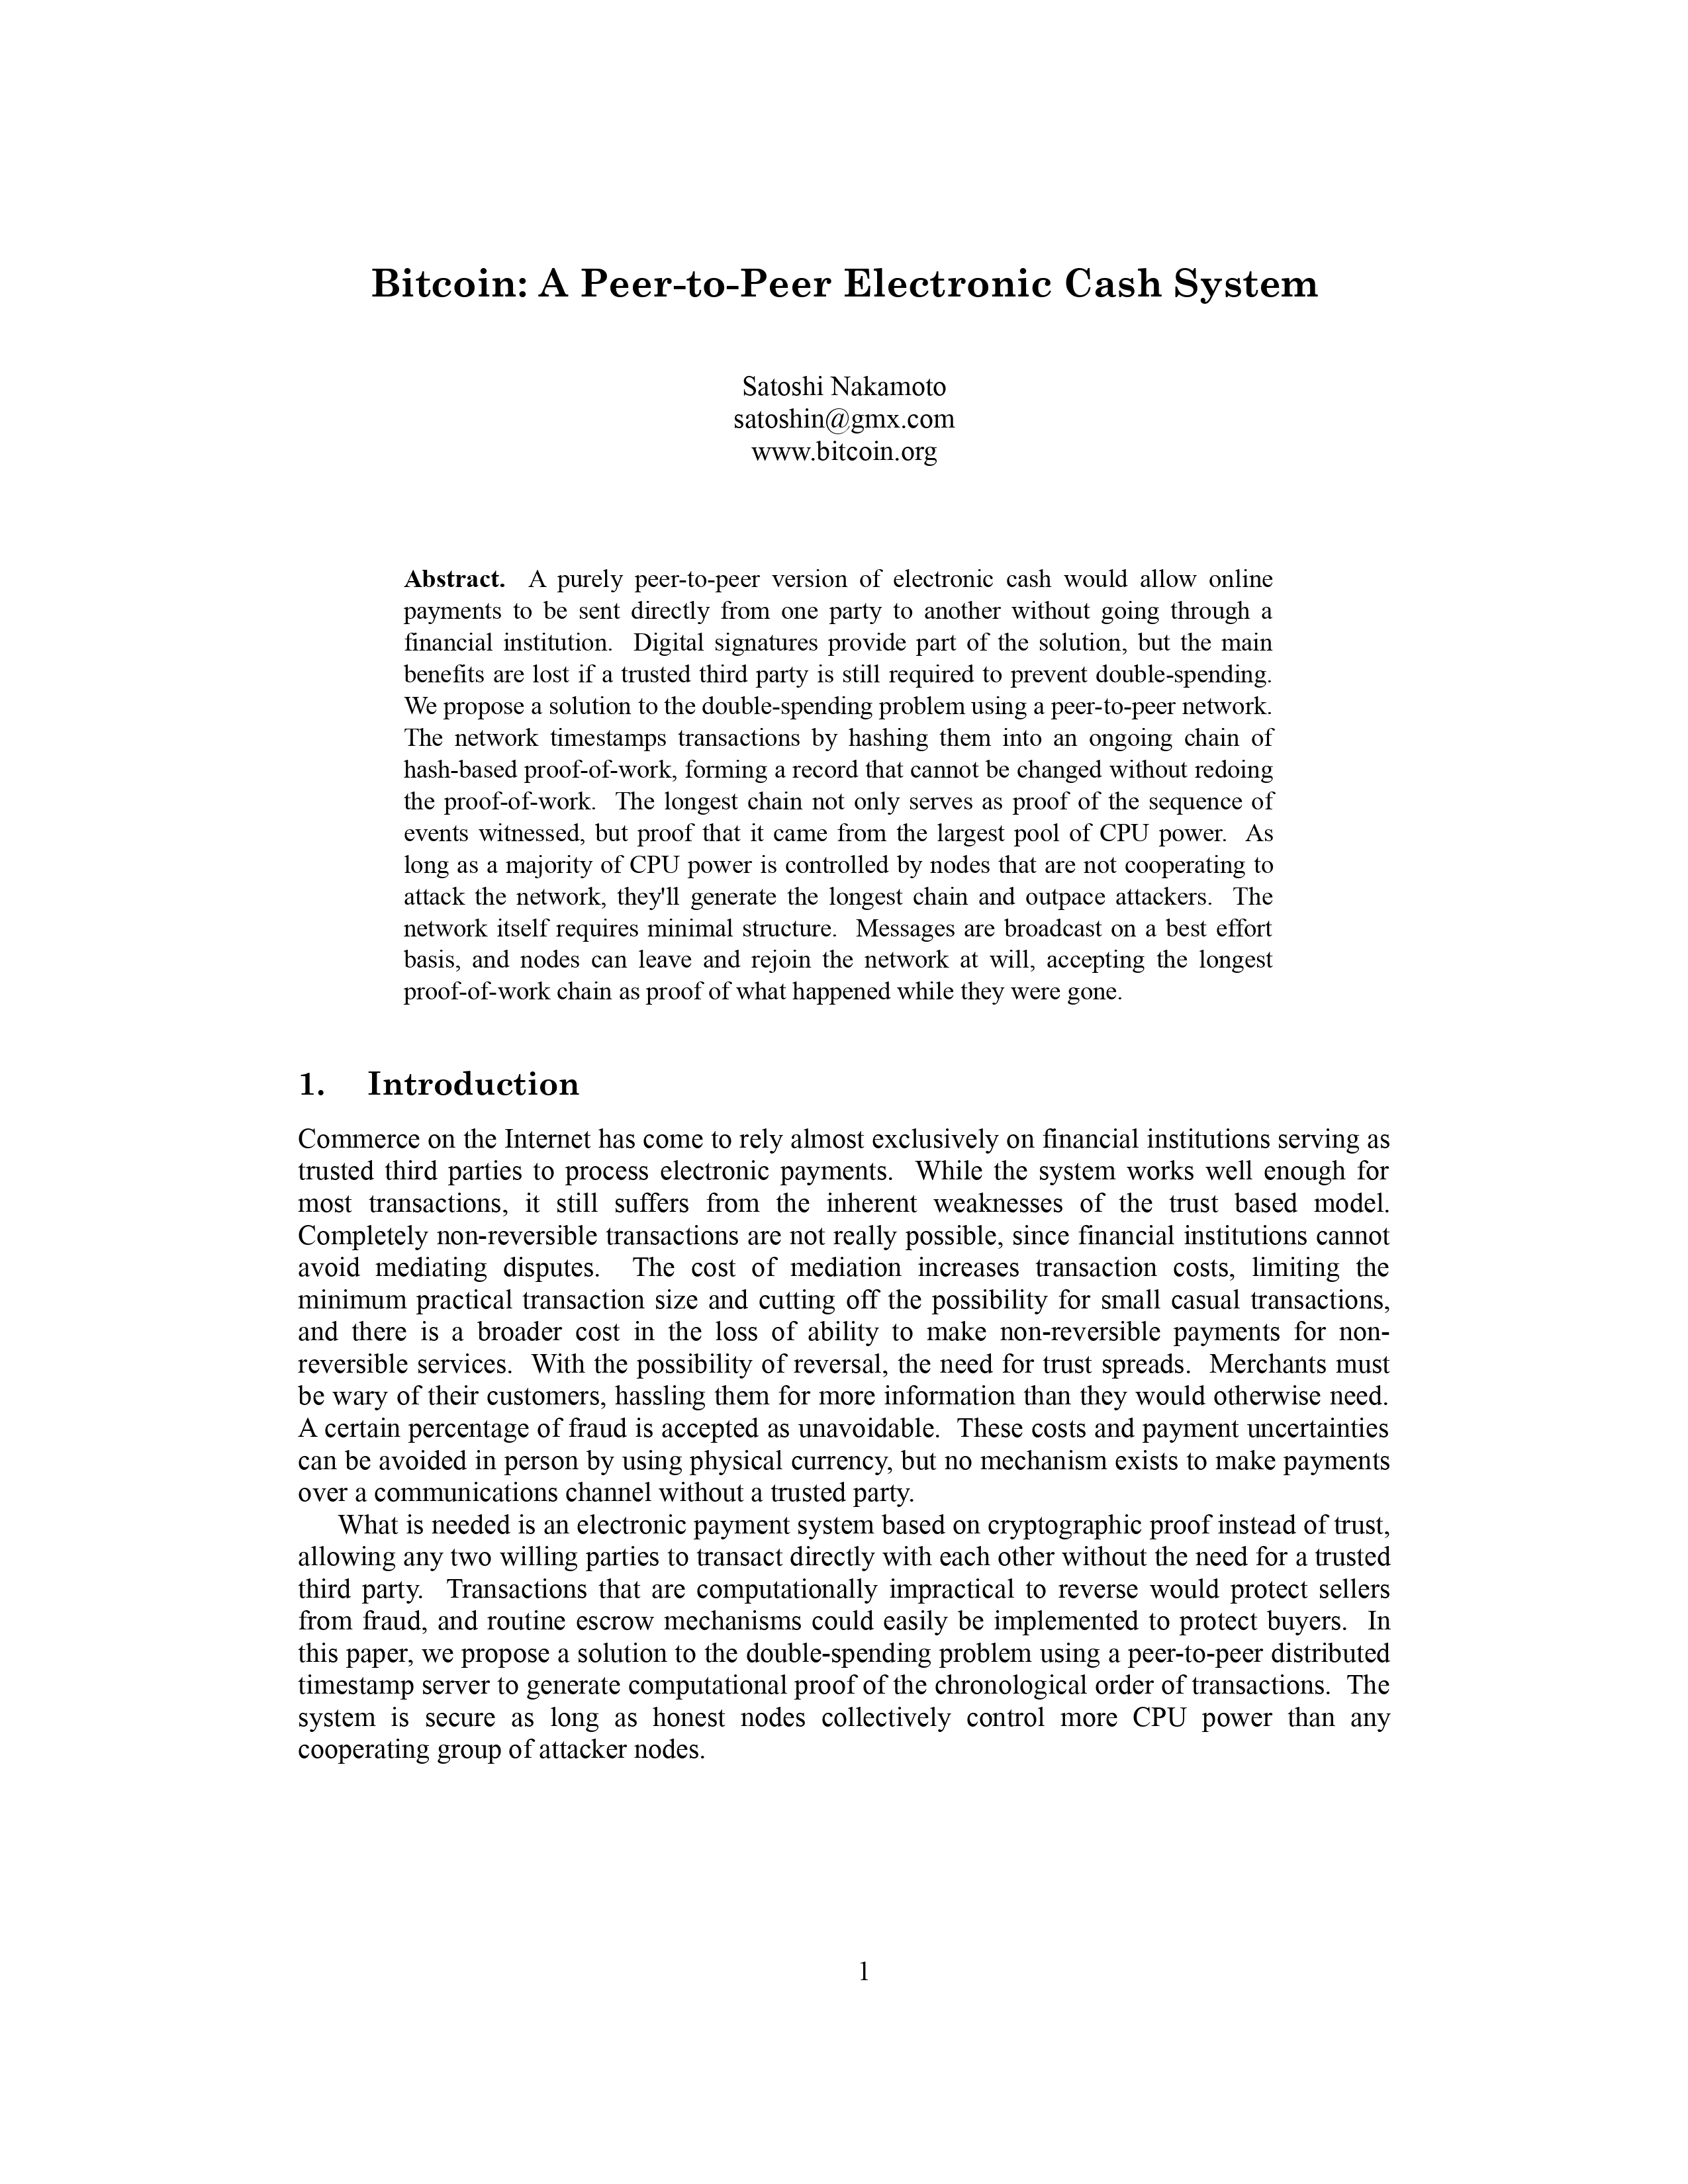 Bitcoin Whitepaper Page 1